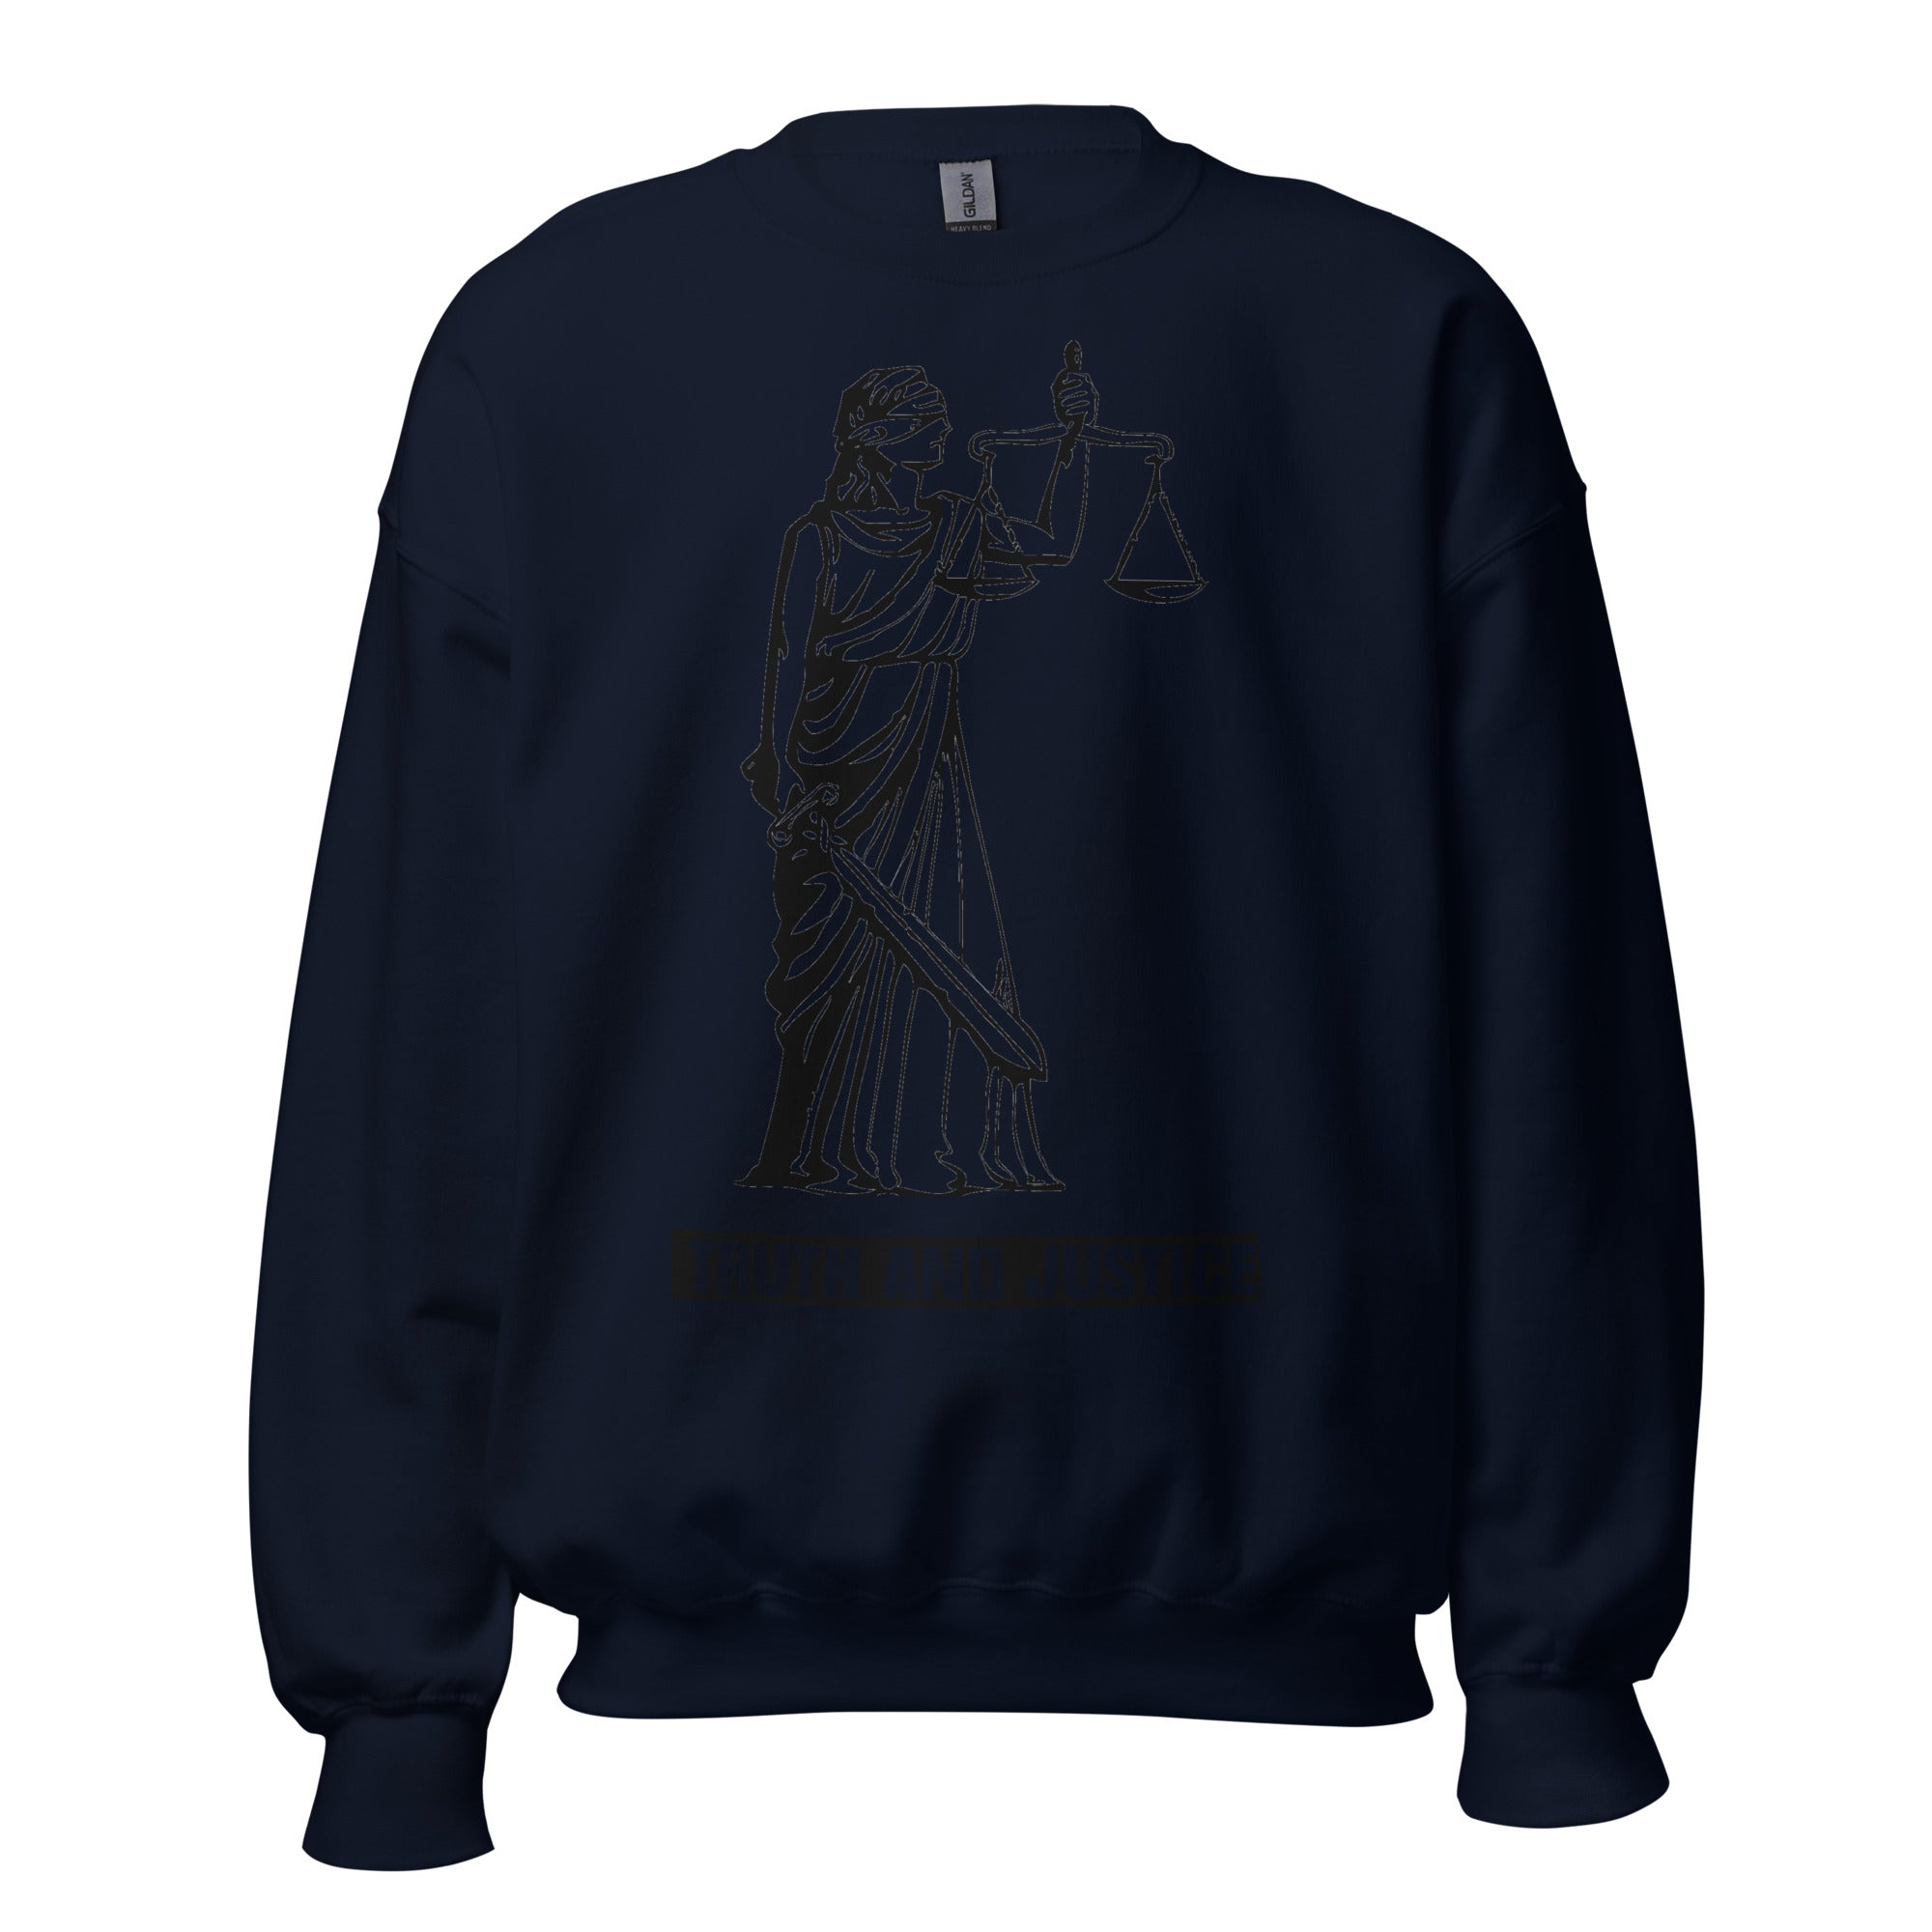 Unisex Crew Neck Sweatshirt - Truth And Justice - GRAPHIC T-SHIRTS